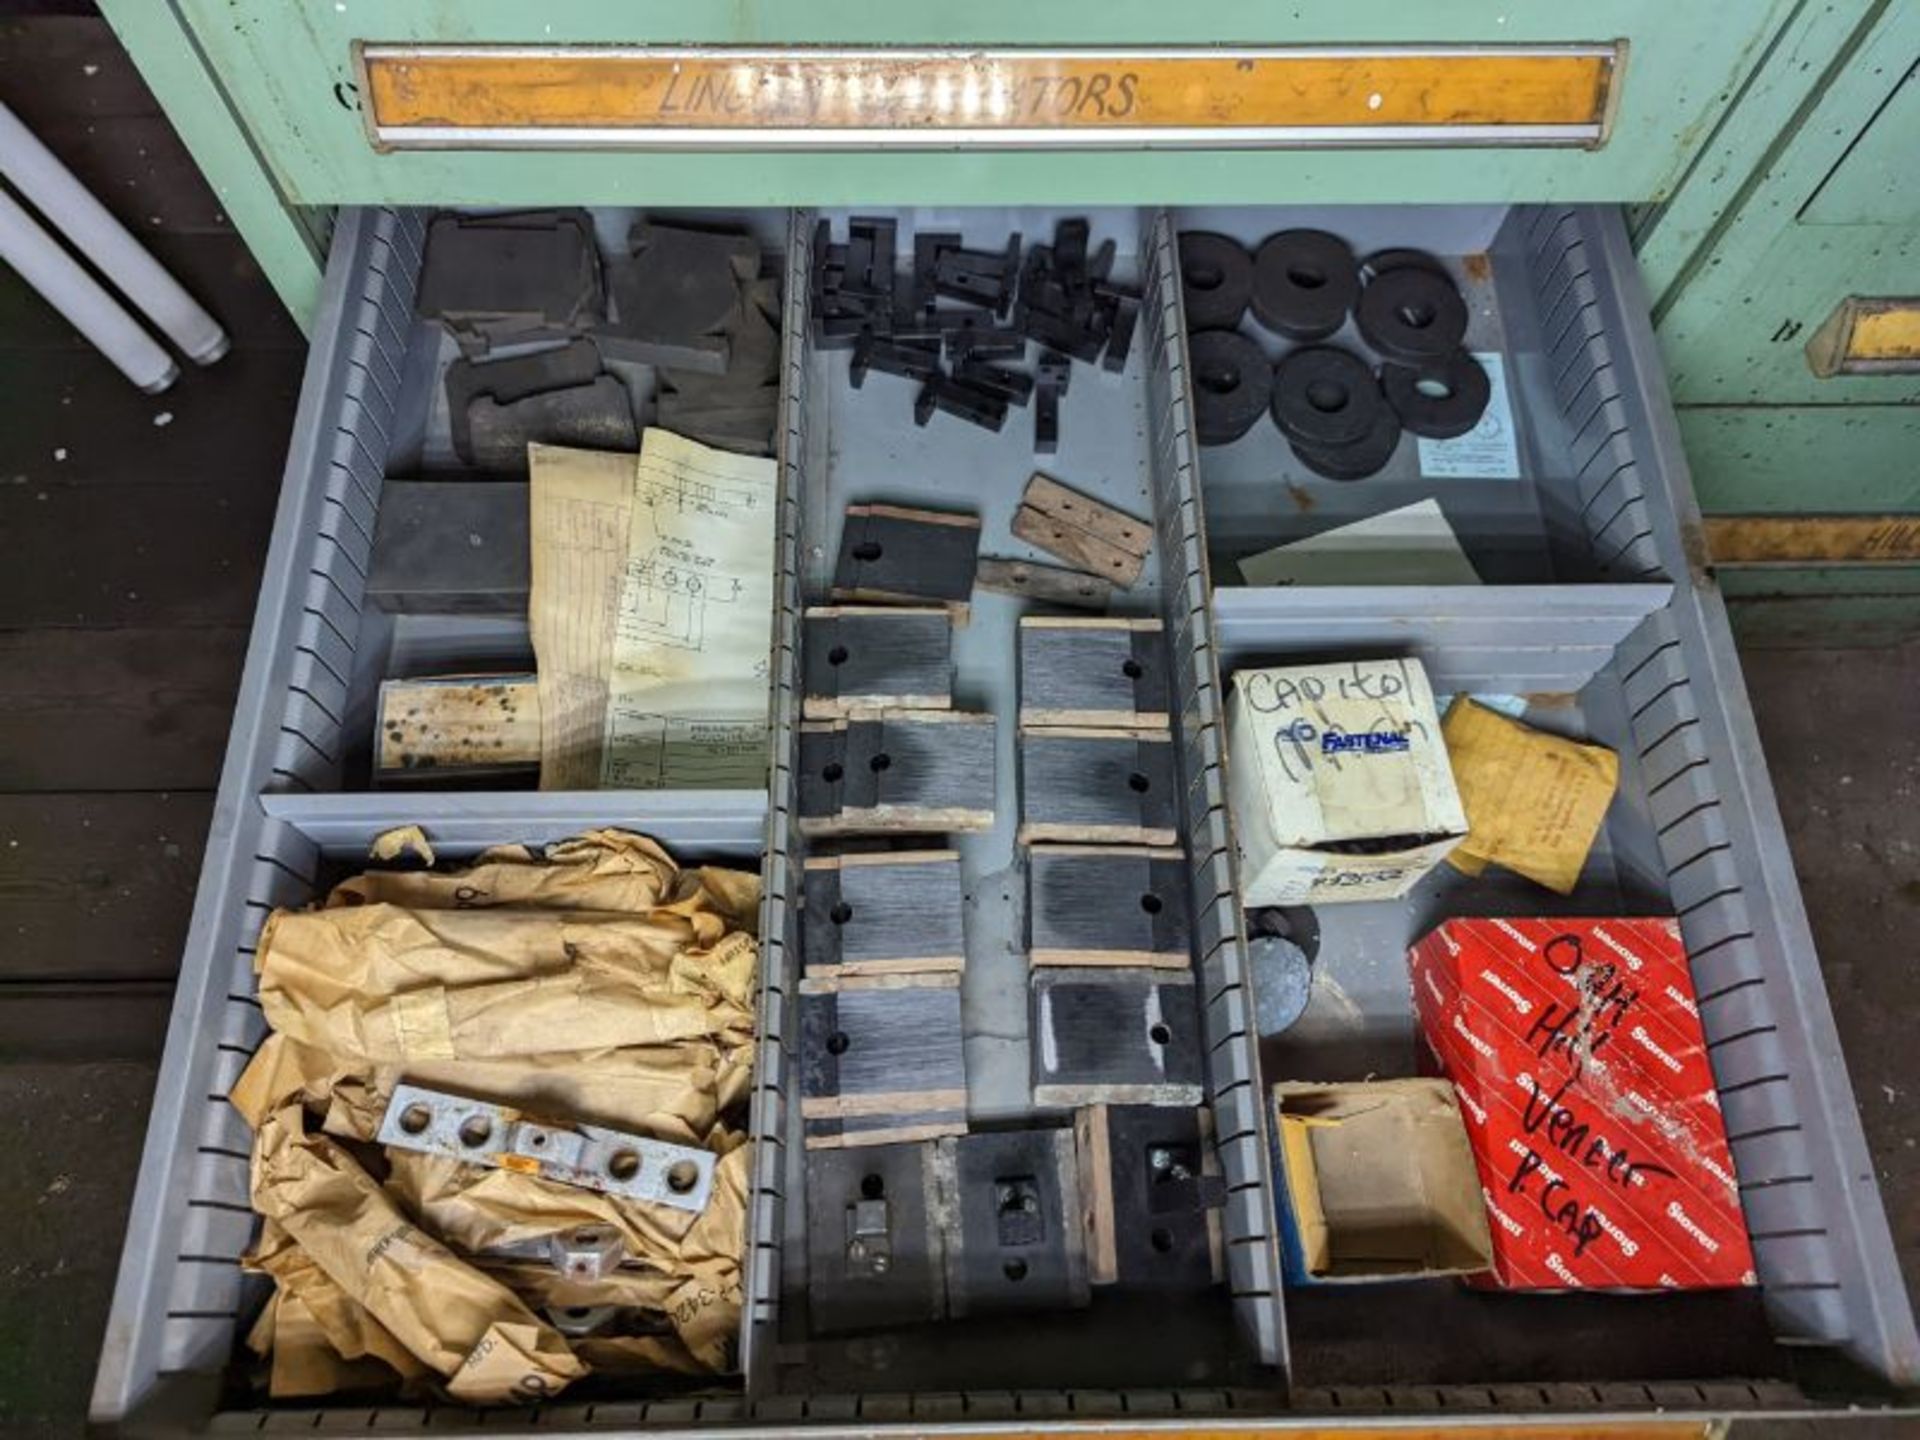 Vidmar Cabinet With Parts Heli Coils, Hardware,Lubricator Parts - Image 11 of 12